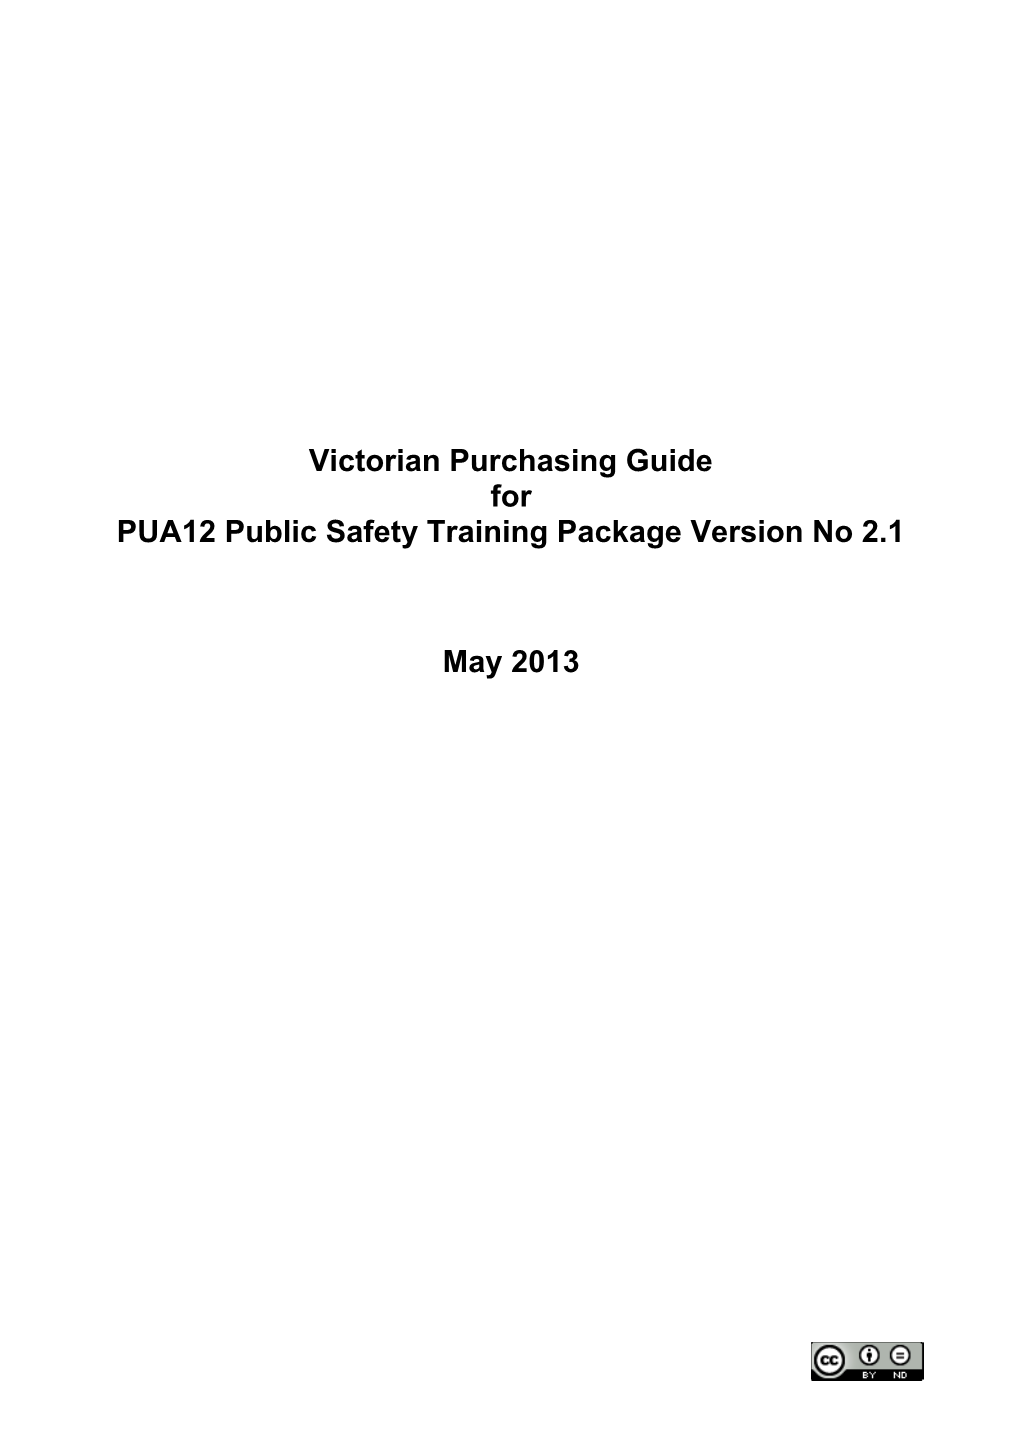 Victorian Purchasing Guide for PUA12 Public Safety Version 2.1